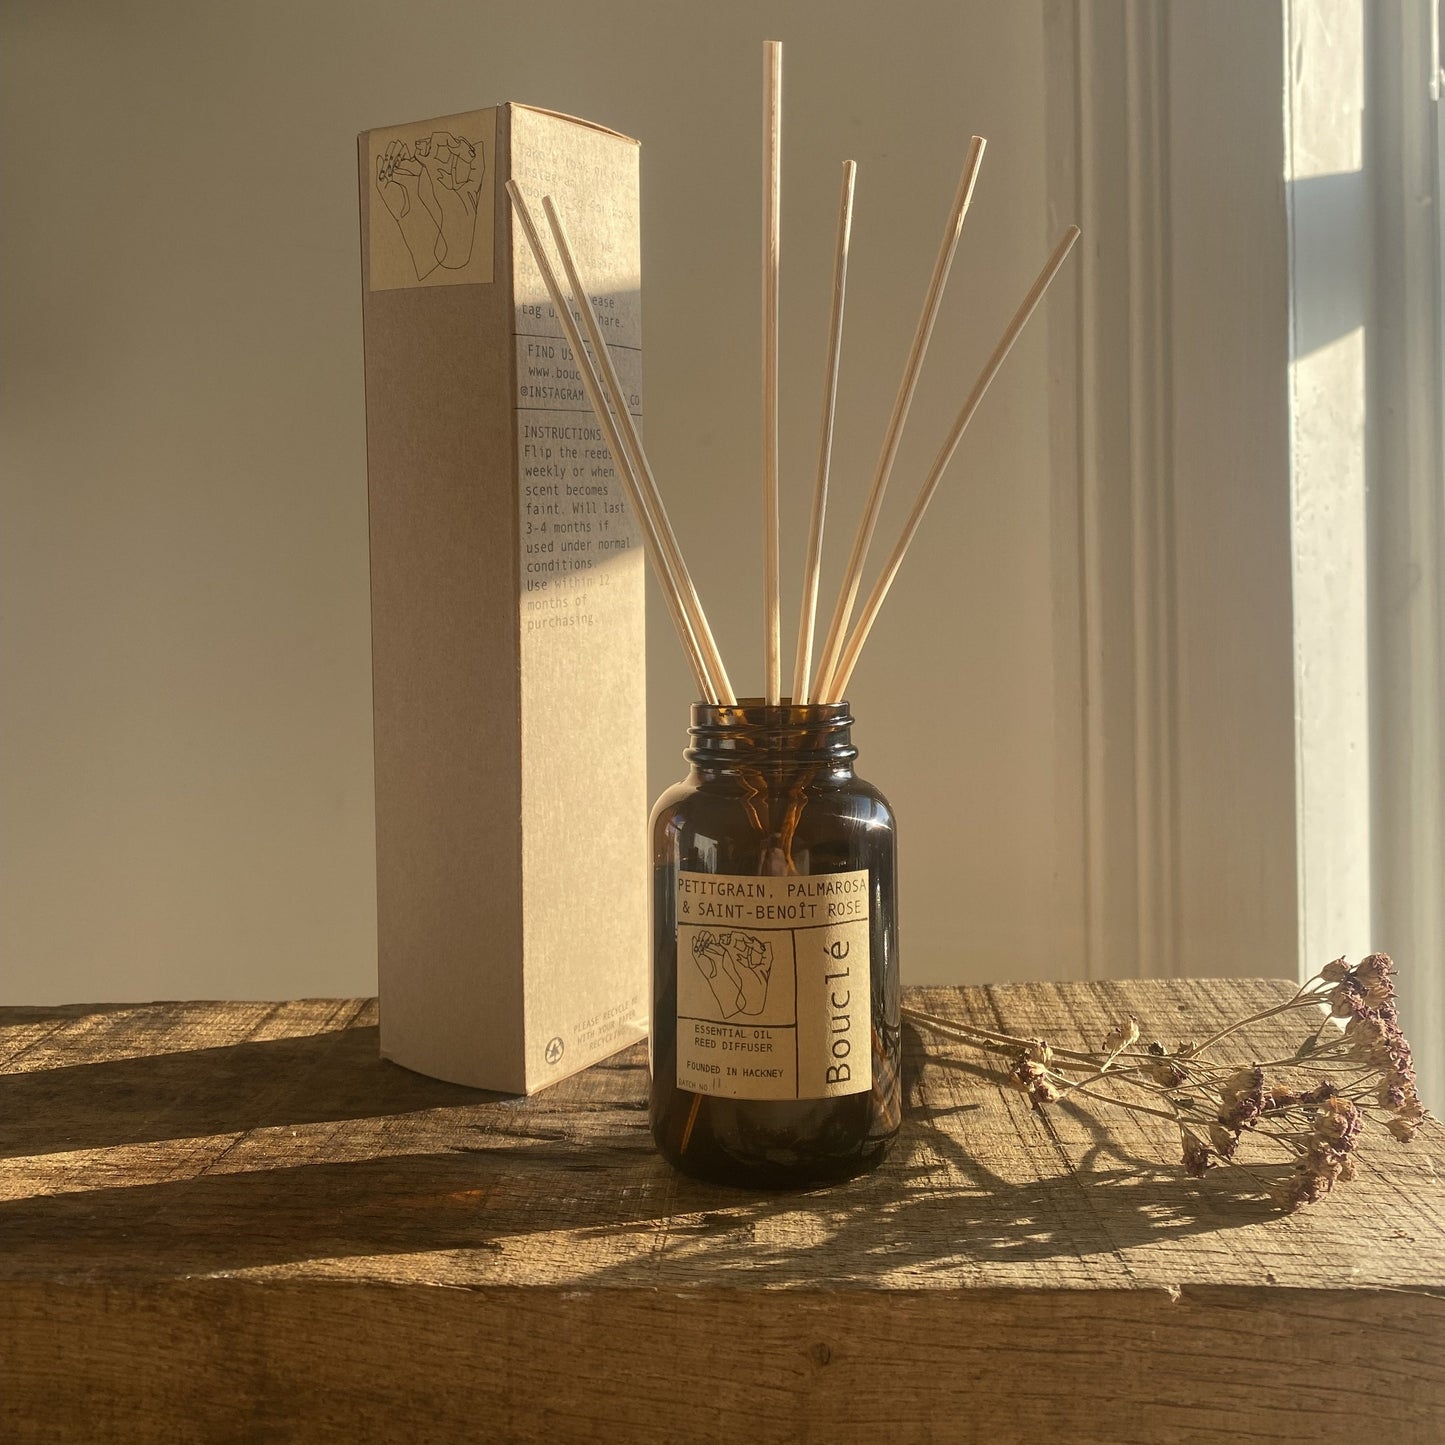 Bouclé London essential oil rattan reed diffuser. Vegan and aromatherapy grade it is in an amber glass bottle.